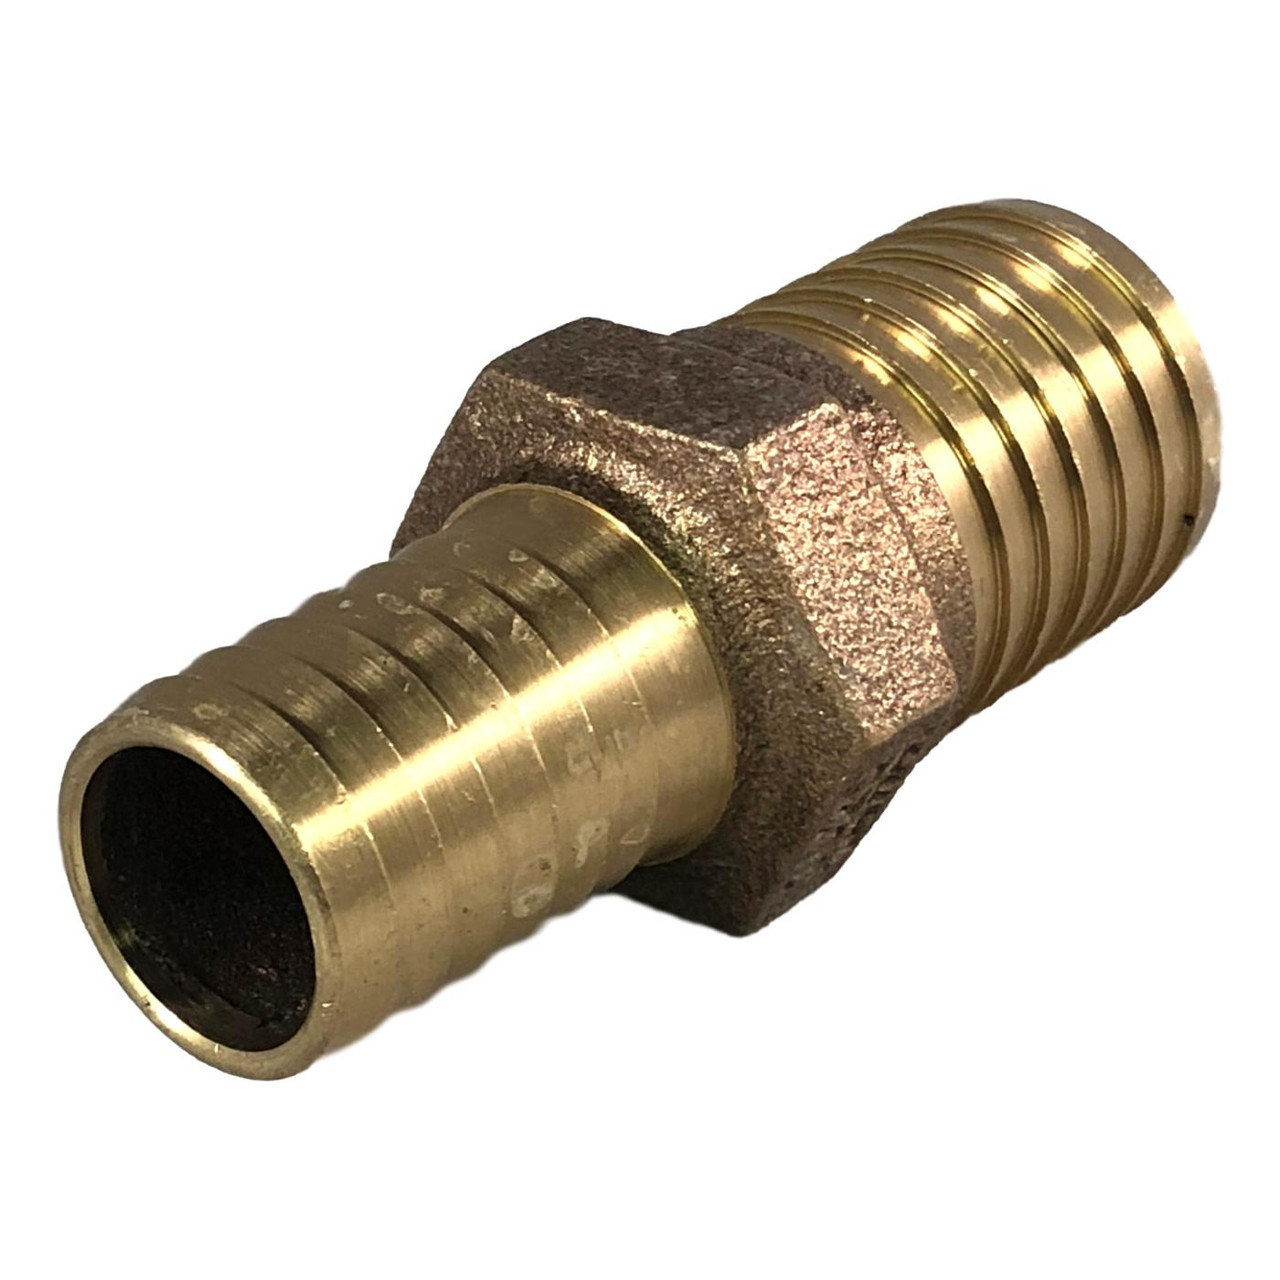 Brass Barb Insert Coupling 1 x 1-1/4 with Hex